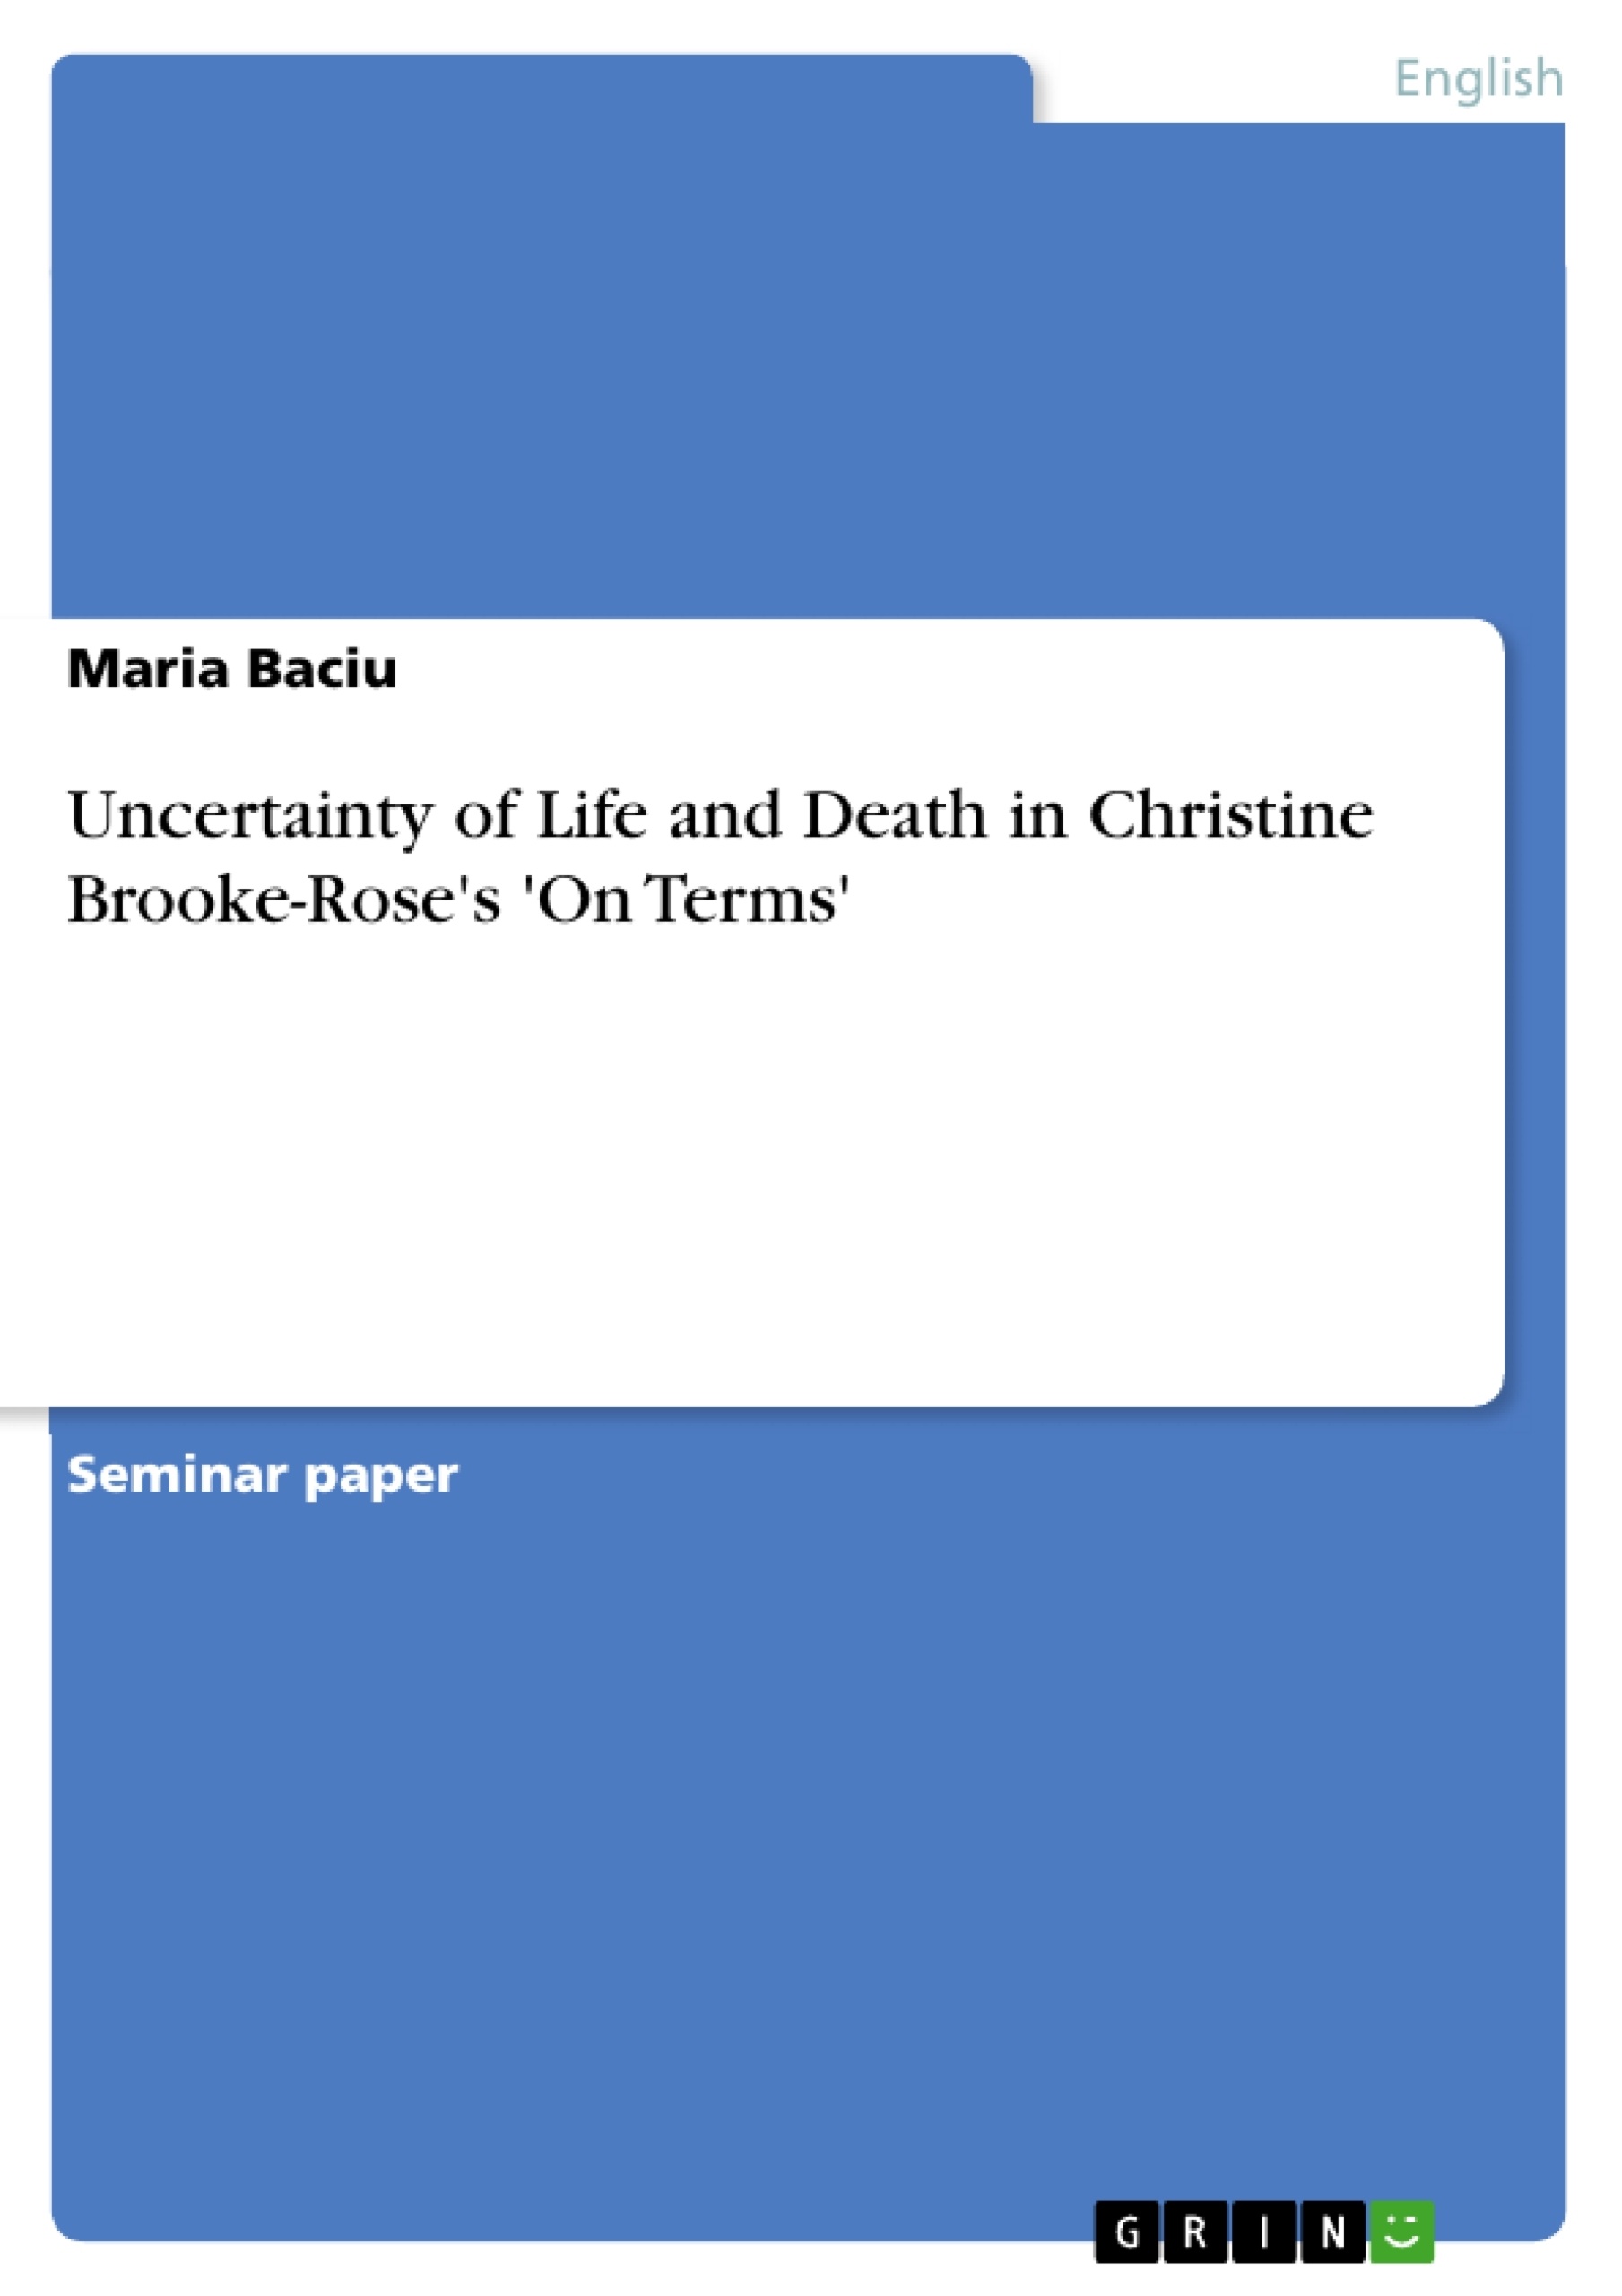 Título: Uncertainty of Life and Death in Christine Brooke-Rose's 'On Terms'